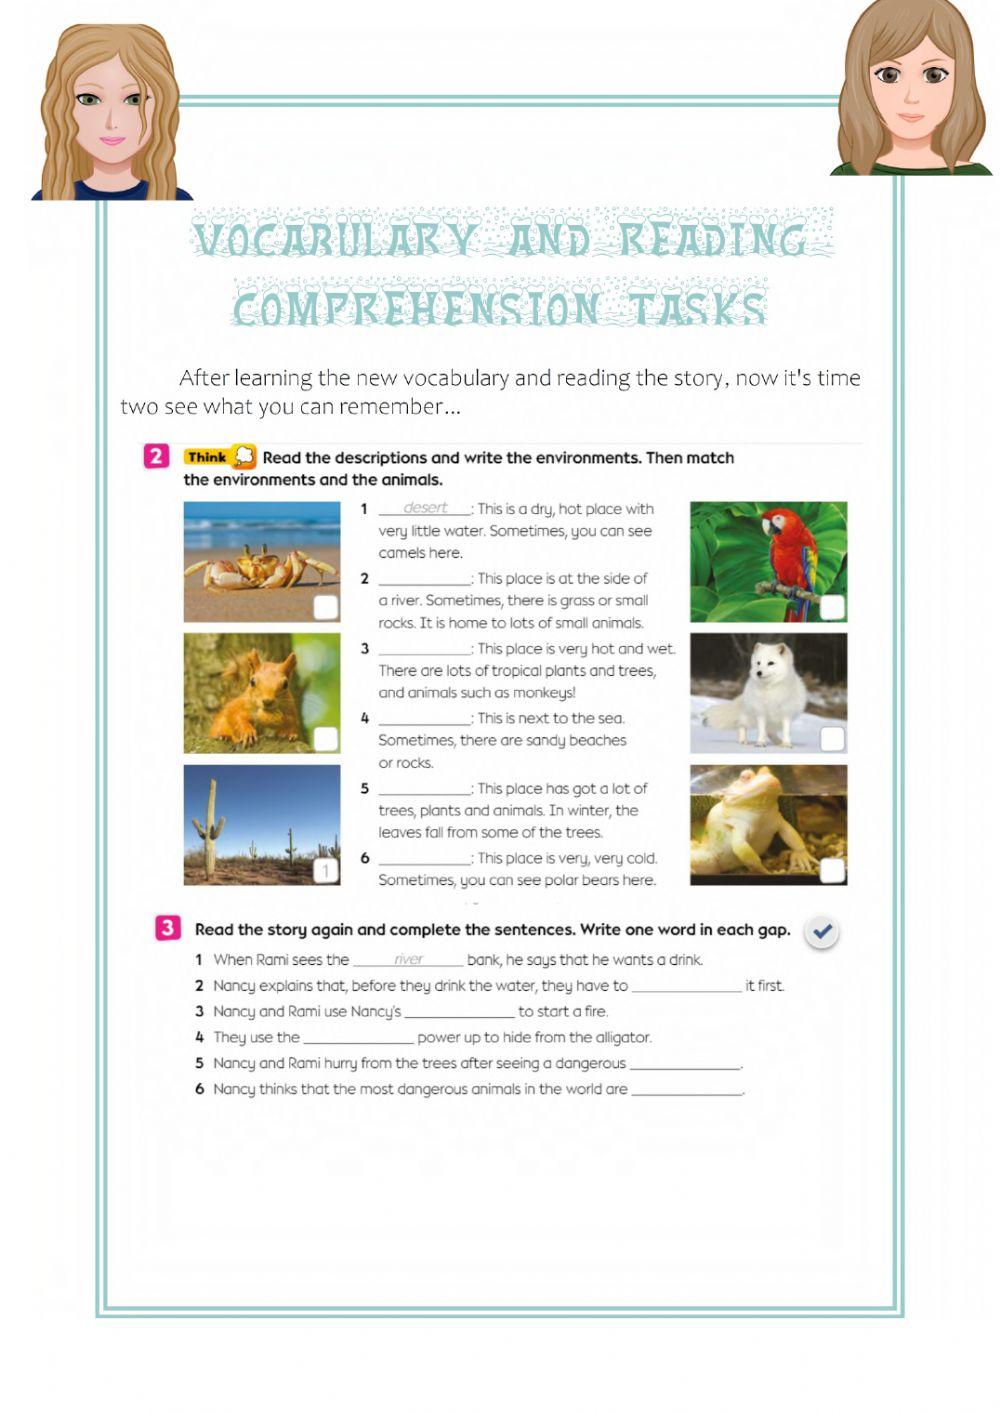 Vocabulary and Reading comprehension task